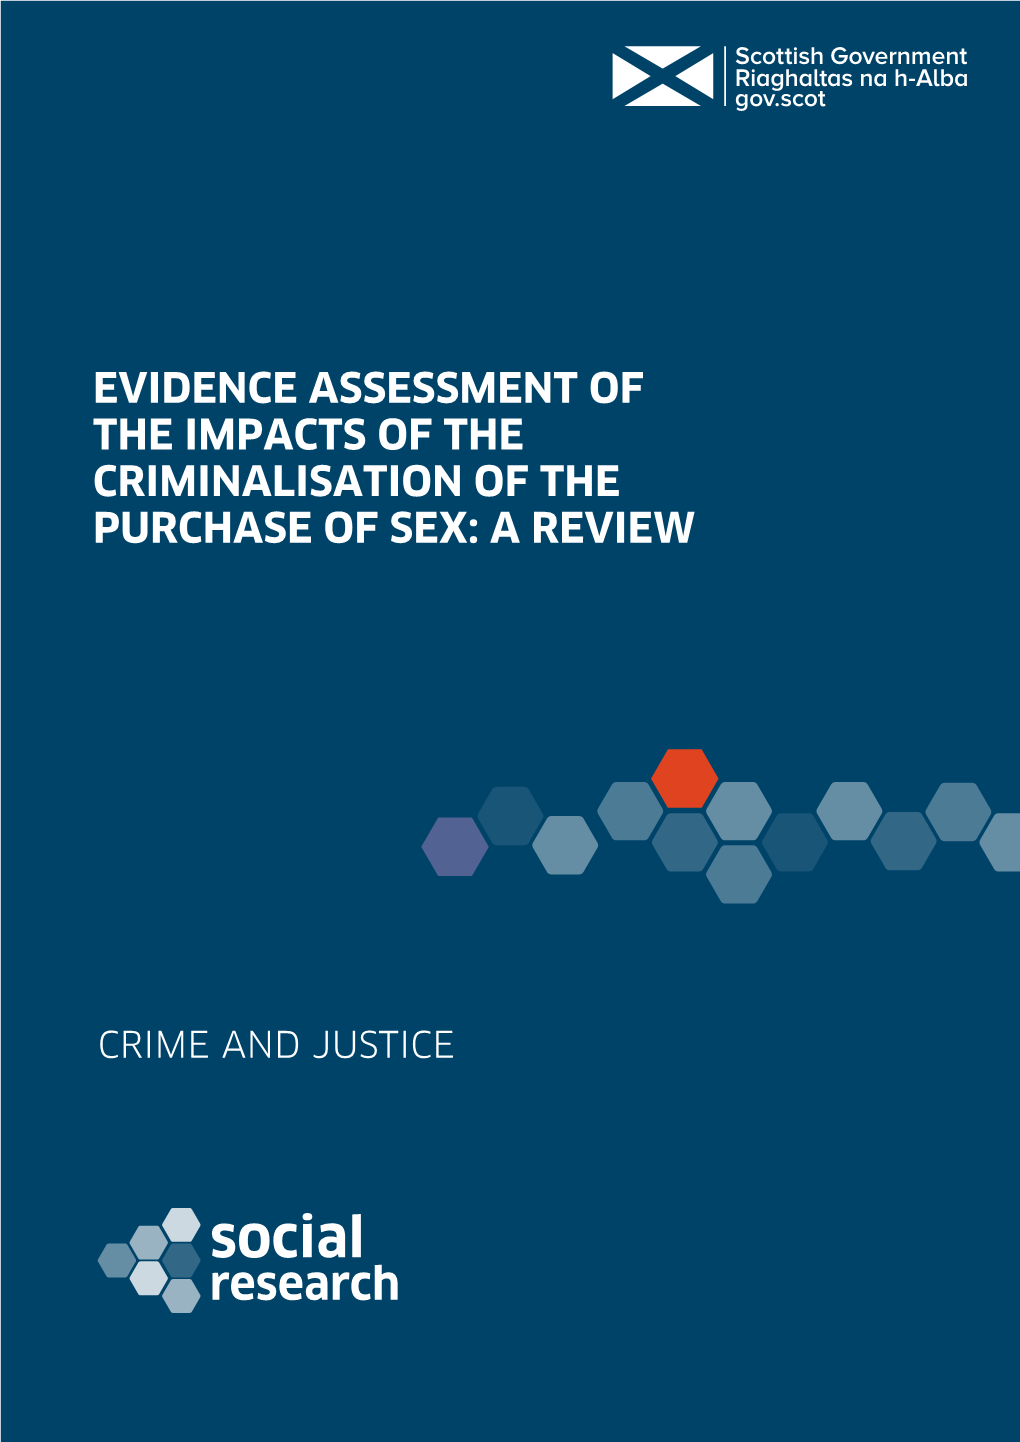 Evidence Assessment of the Impacts of the Criminalisation of the Purchase of Sex: a Review